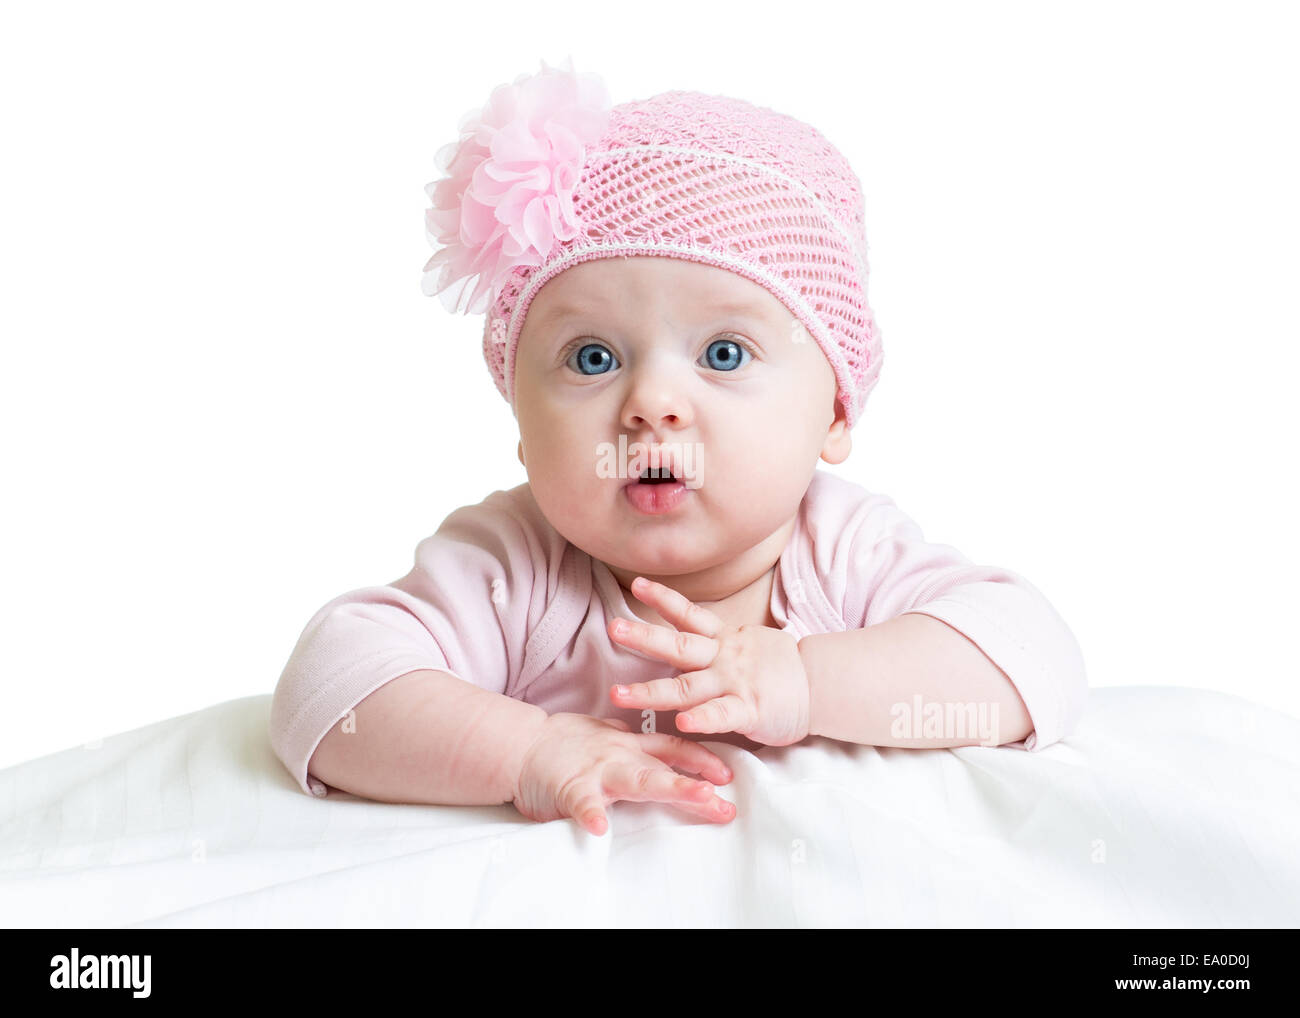 baby girl in pink knitted hat Stock Photo